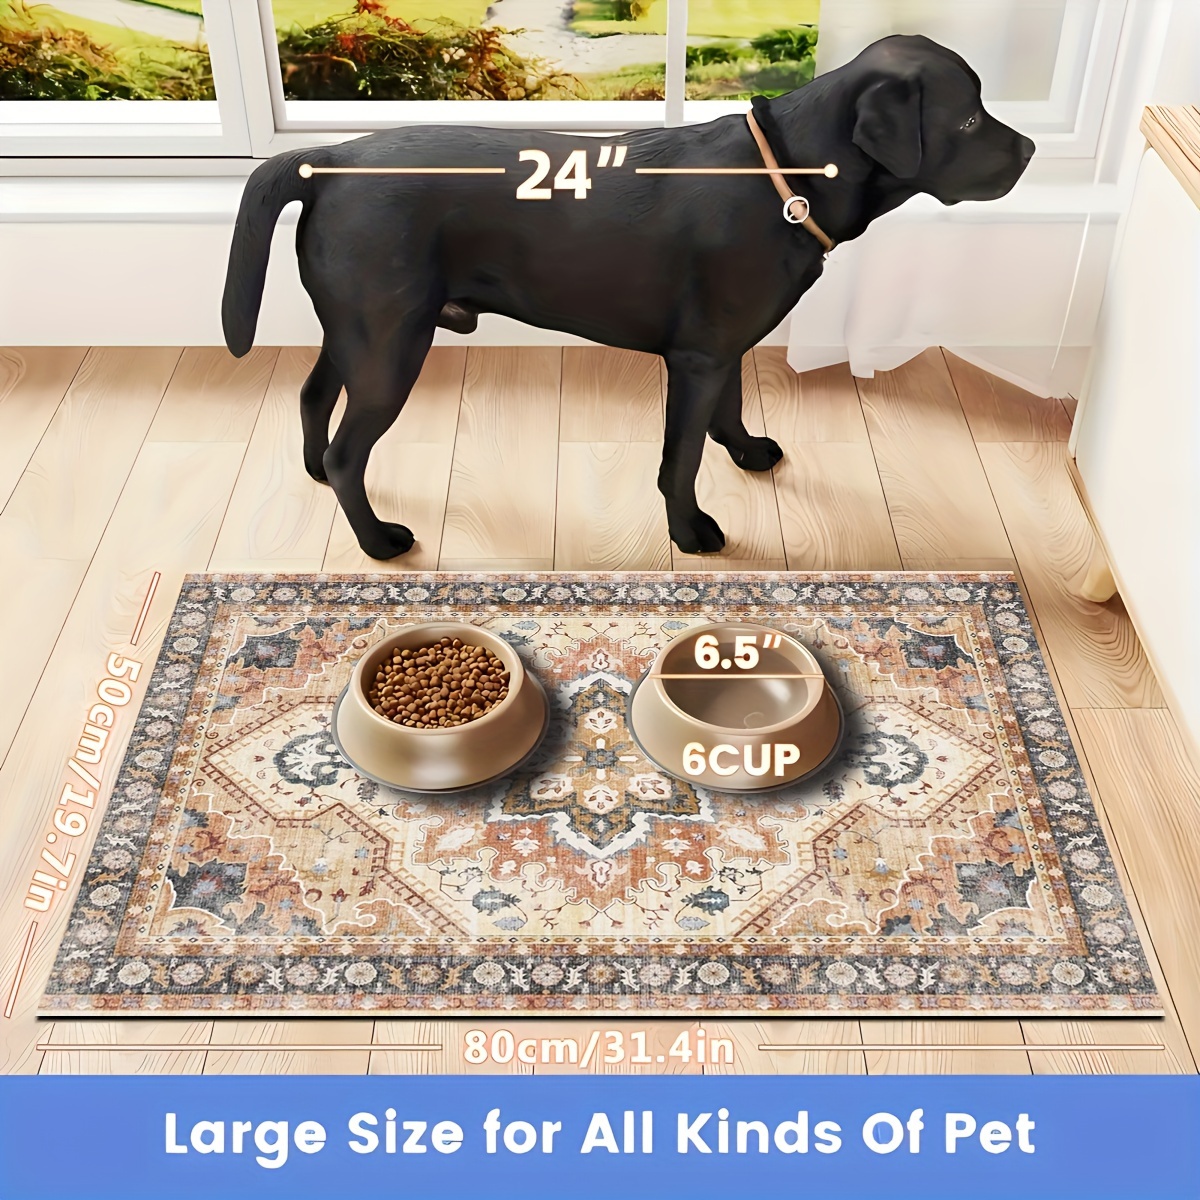 

Polyester Waterproof Feeding Mat For Dogs - Non-slip Pet Food Placemat With Elegant Design - Durable And Easy To Clean Dog Feeding Mat - Suitable For All Breeds And Sizes